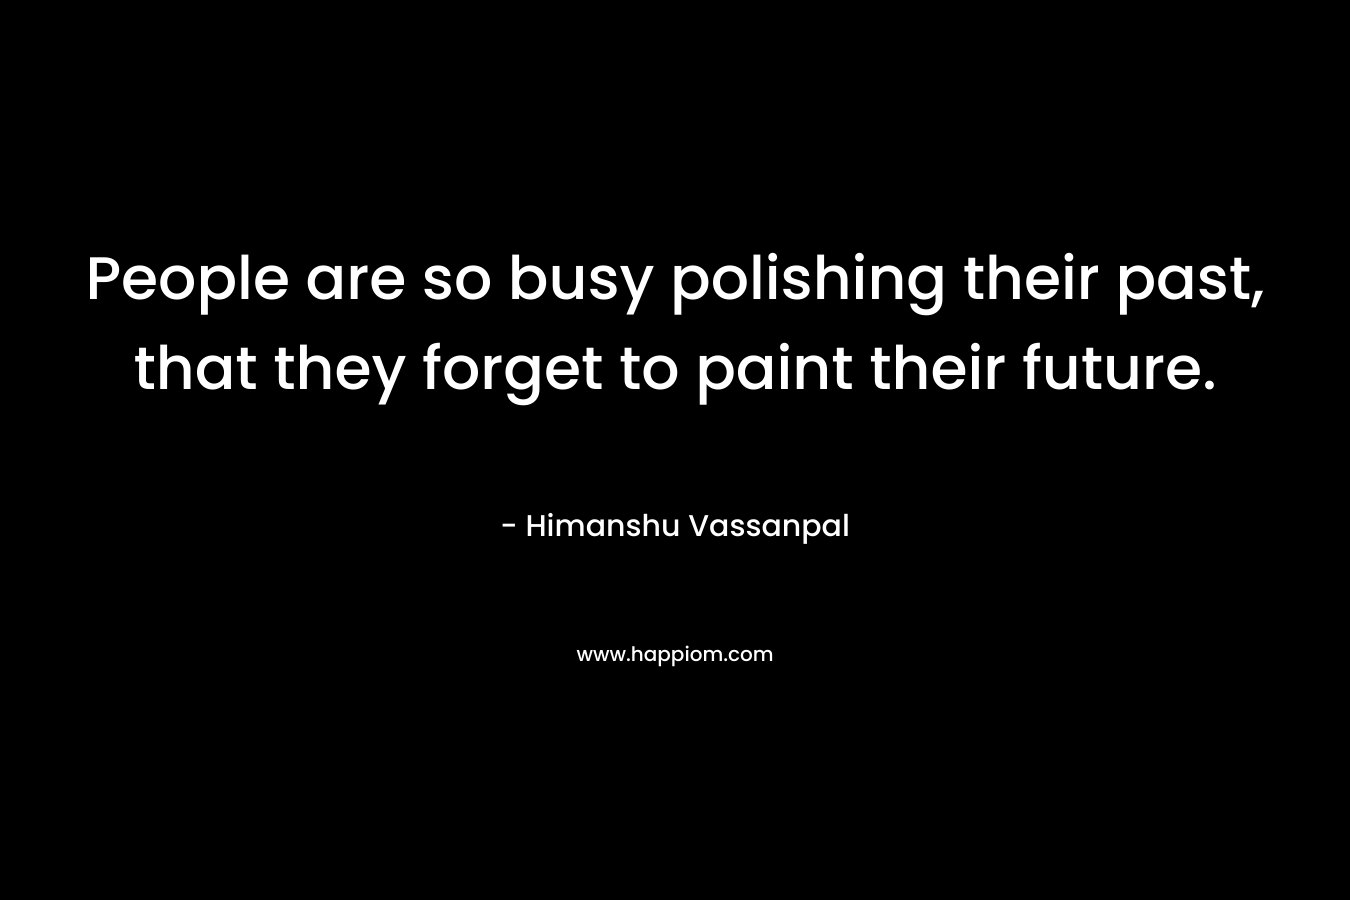 People are so busy polishing their past, that they forget to paint their future. – Himanshu Vassanpal